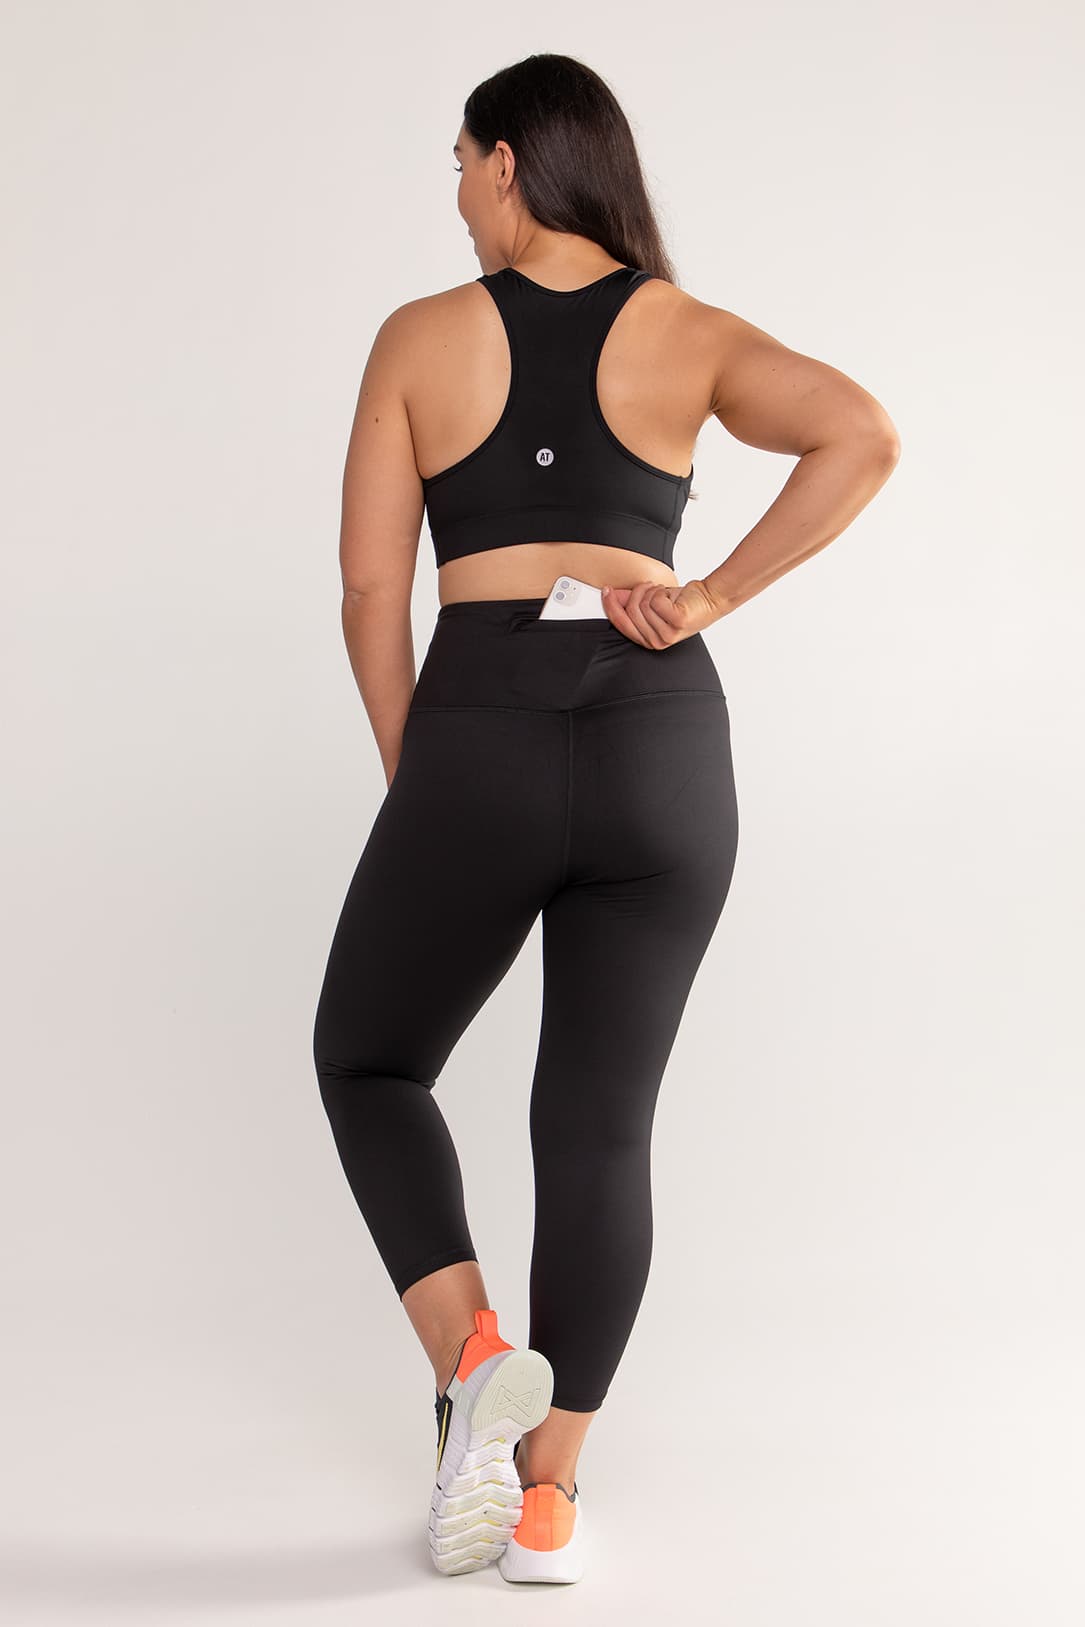 Buy Neu Look Gym wear Leggings Ankle Length Workout Tights | Stretchable Sports  Leggings | High Waist Sports Fitness Yoga Track Pants for Girls Women  Online In India At Discounted Prices